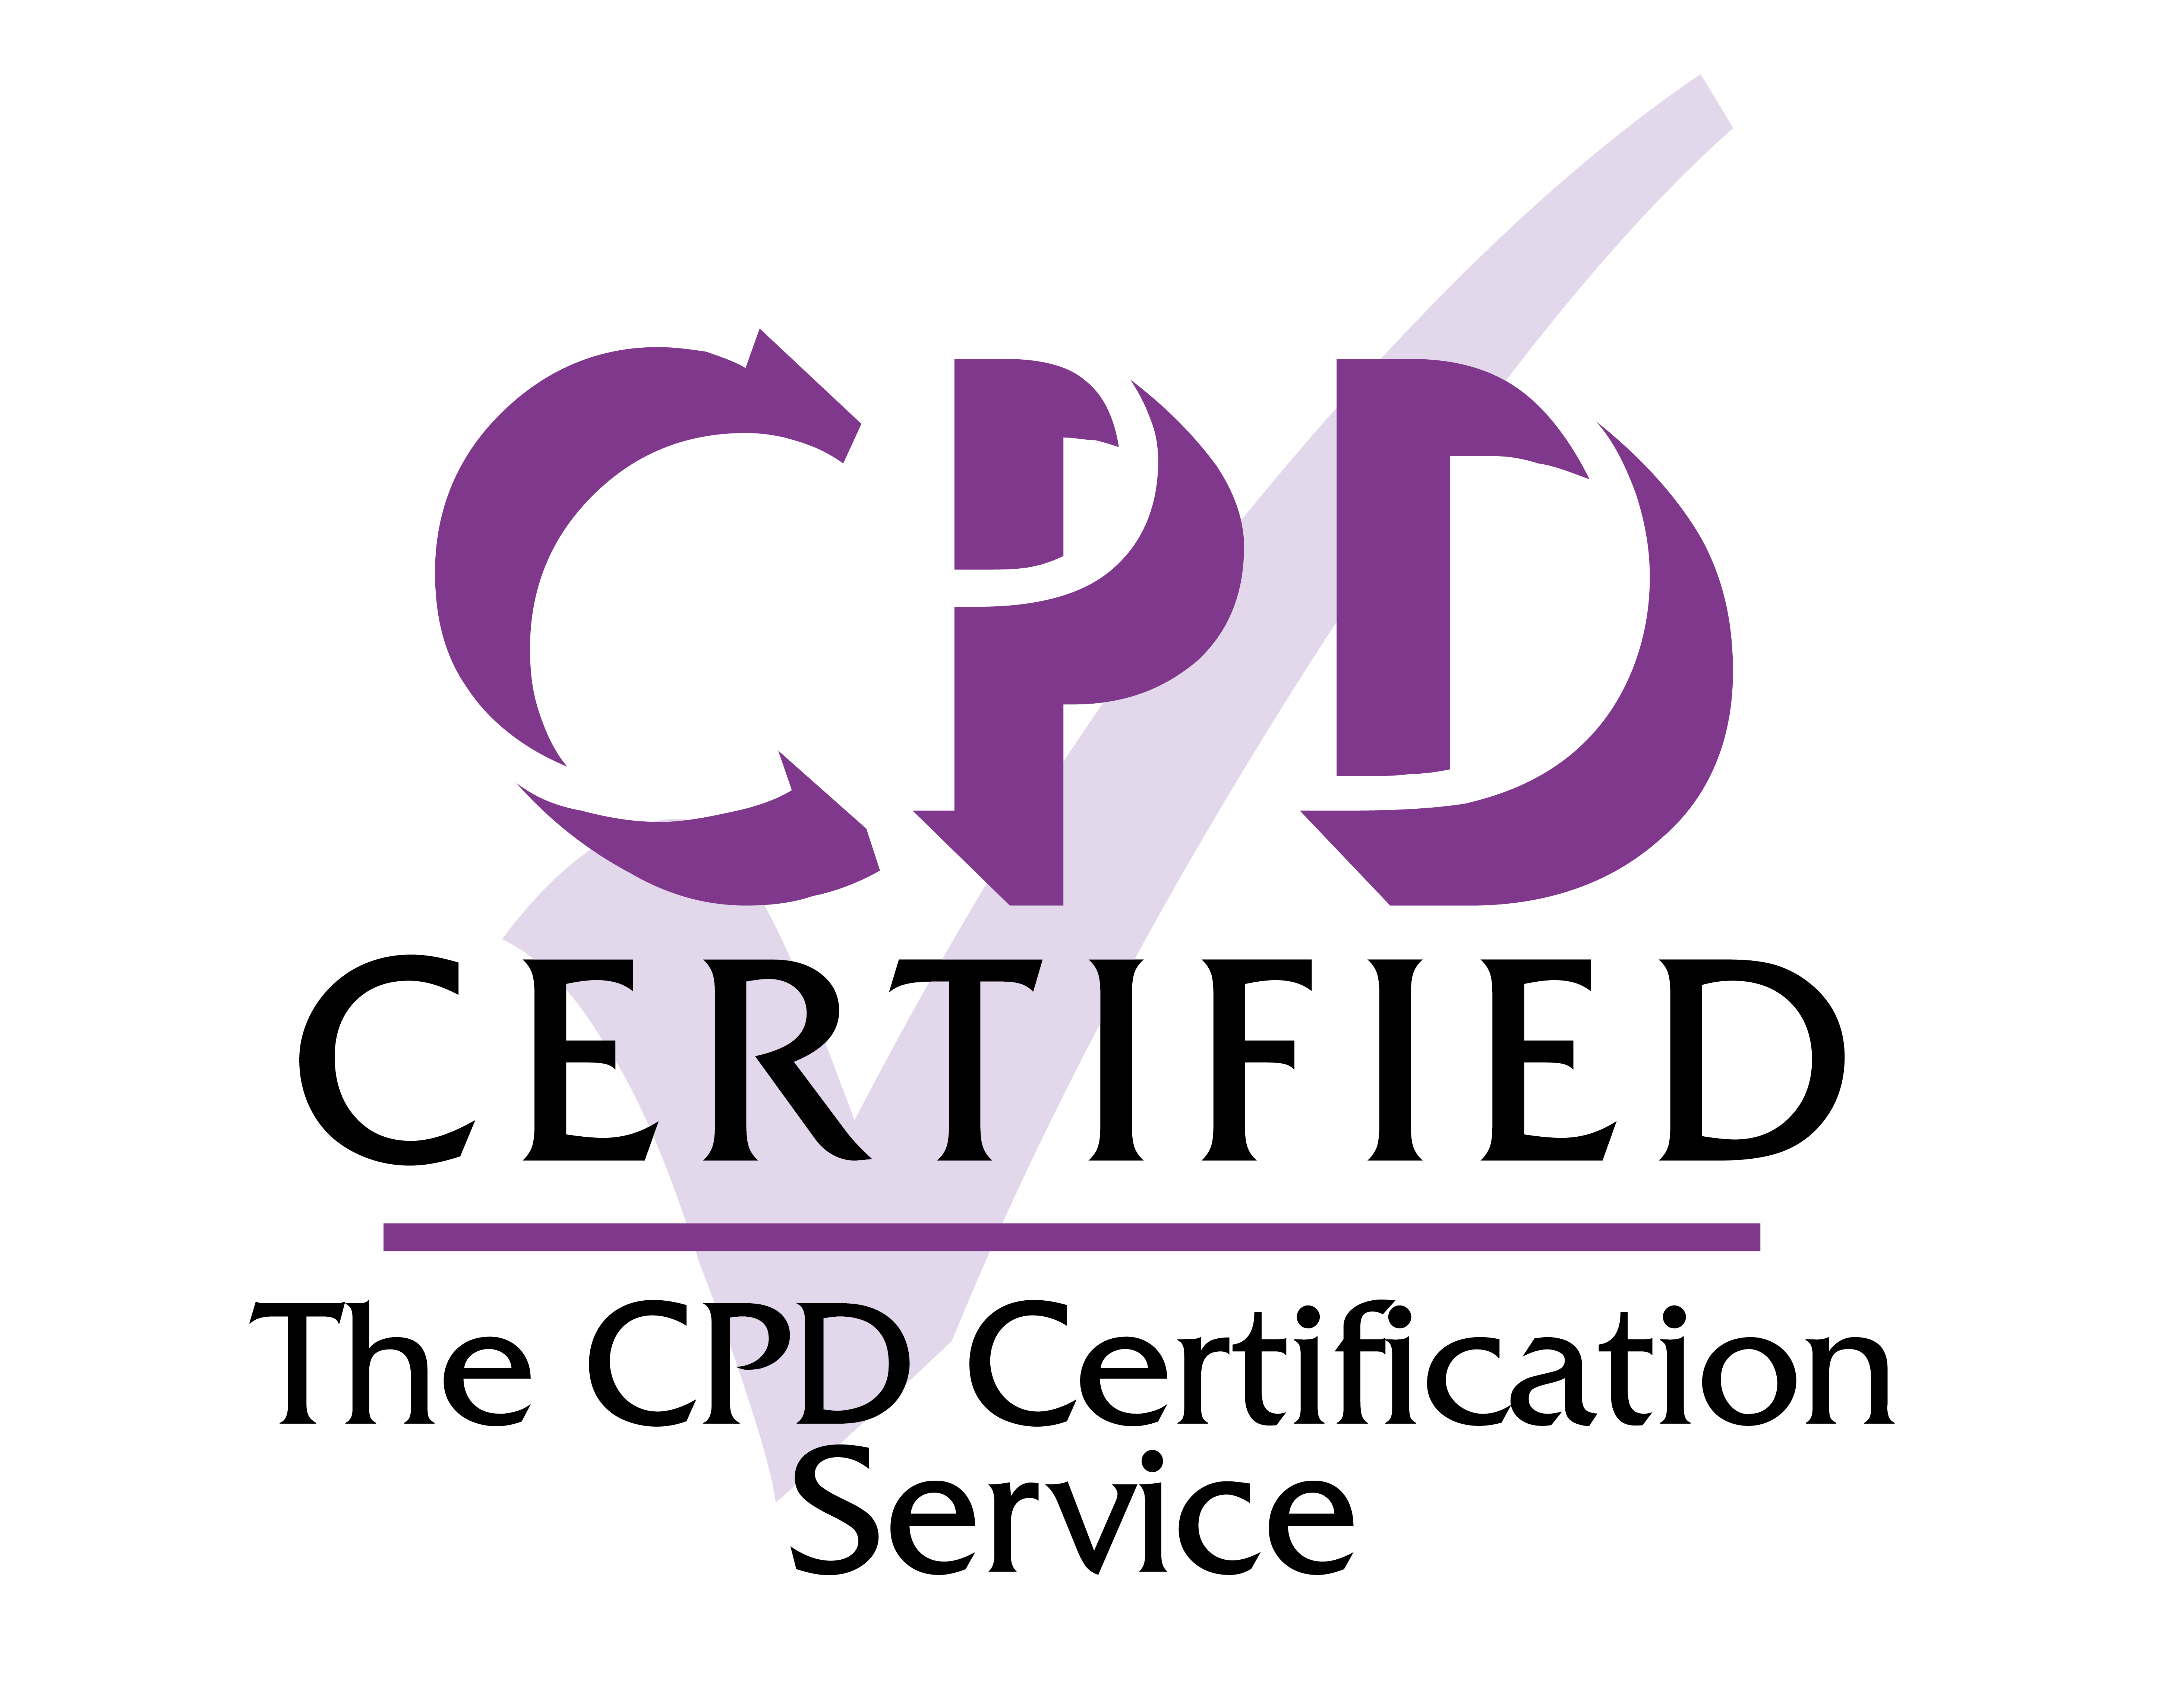 CPD certification